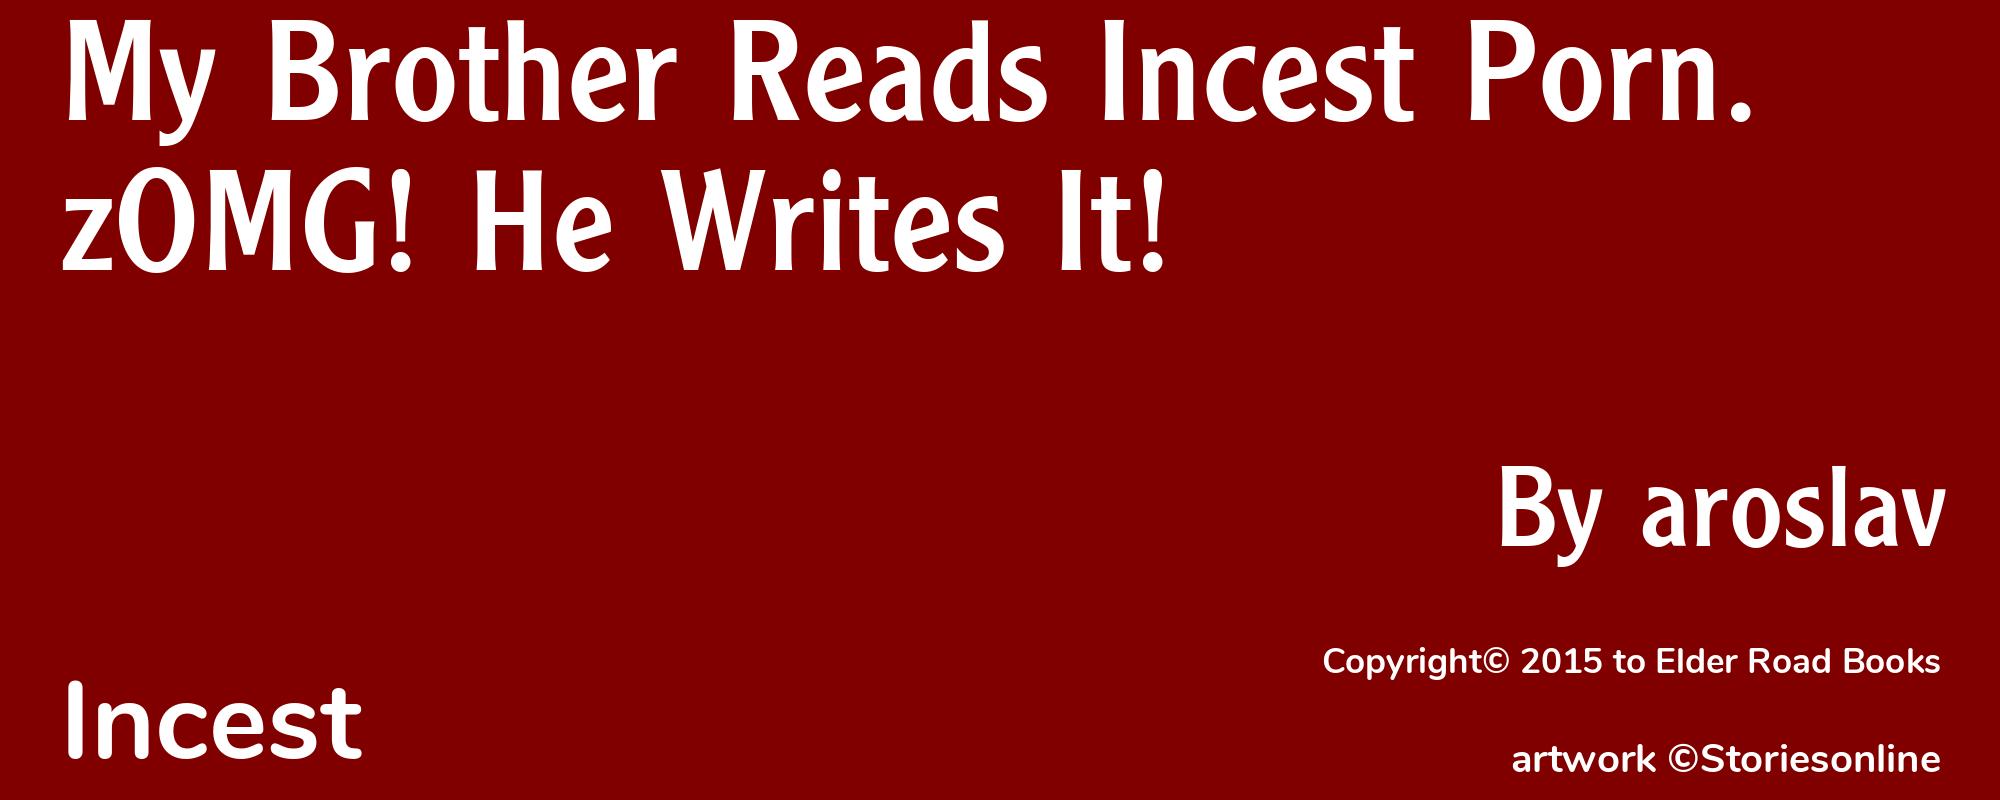 My Brother Reads Incest Porn. zOMG! He Writes It! - Cover